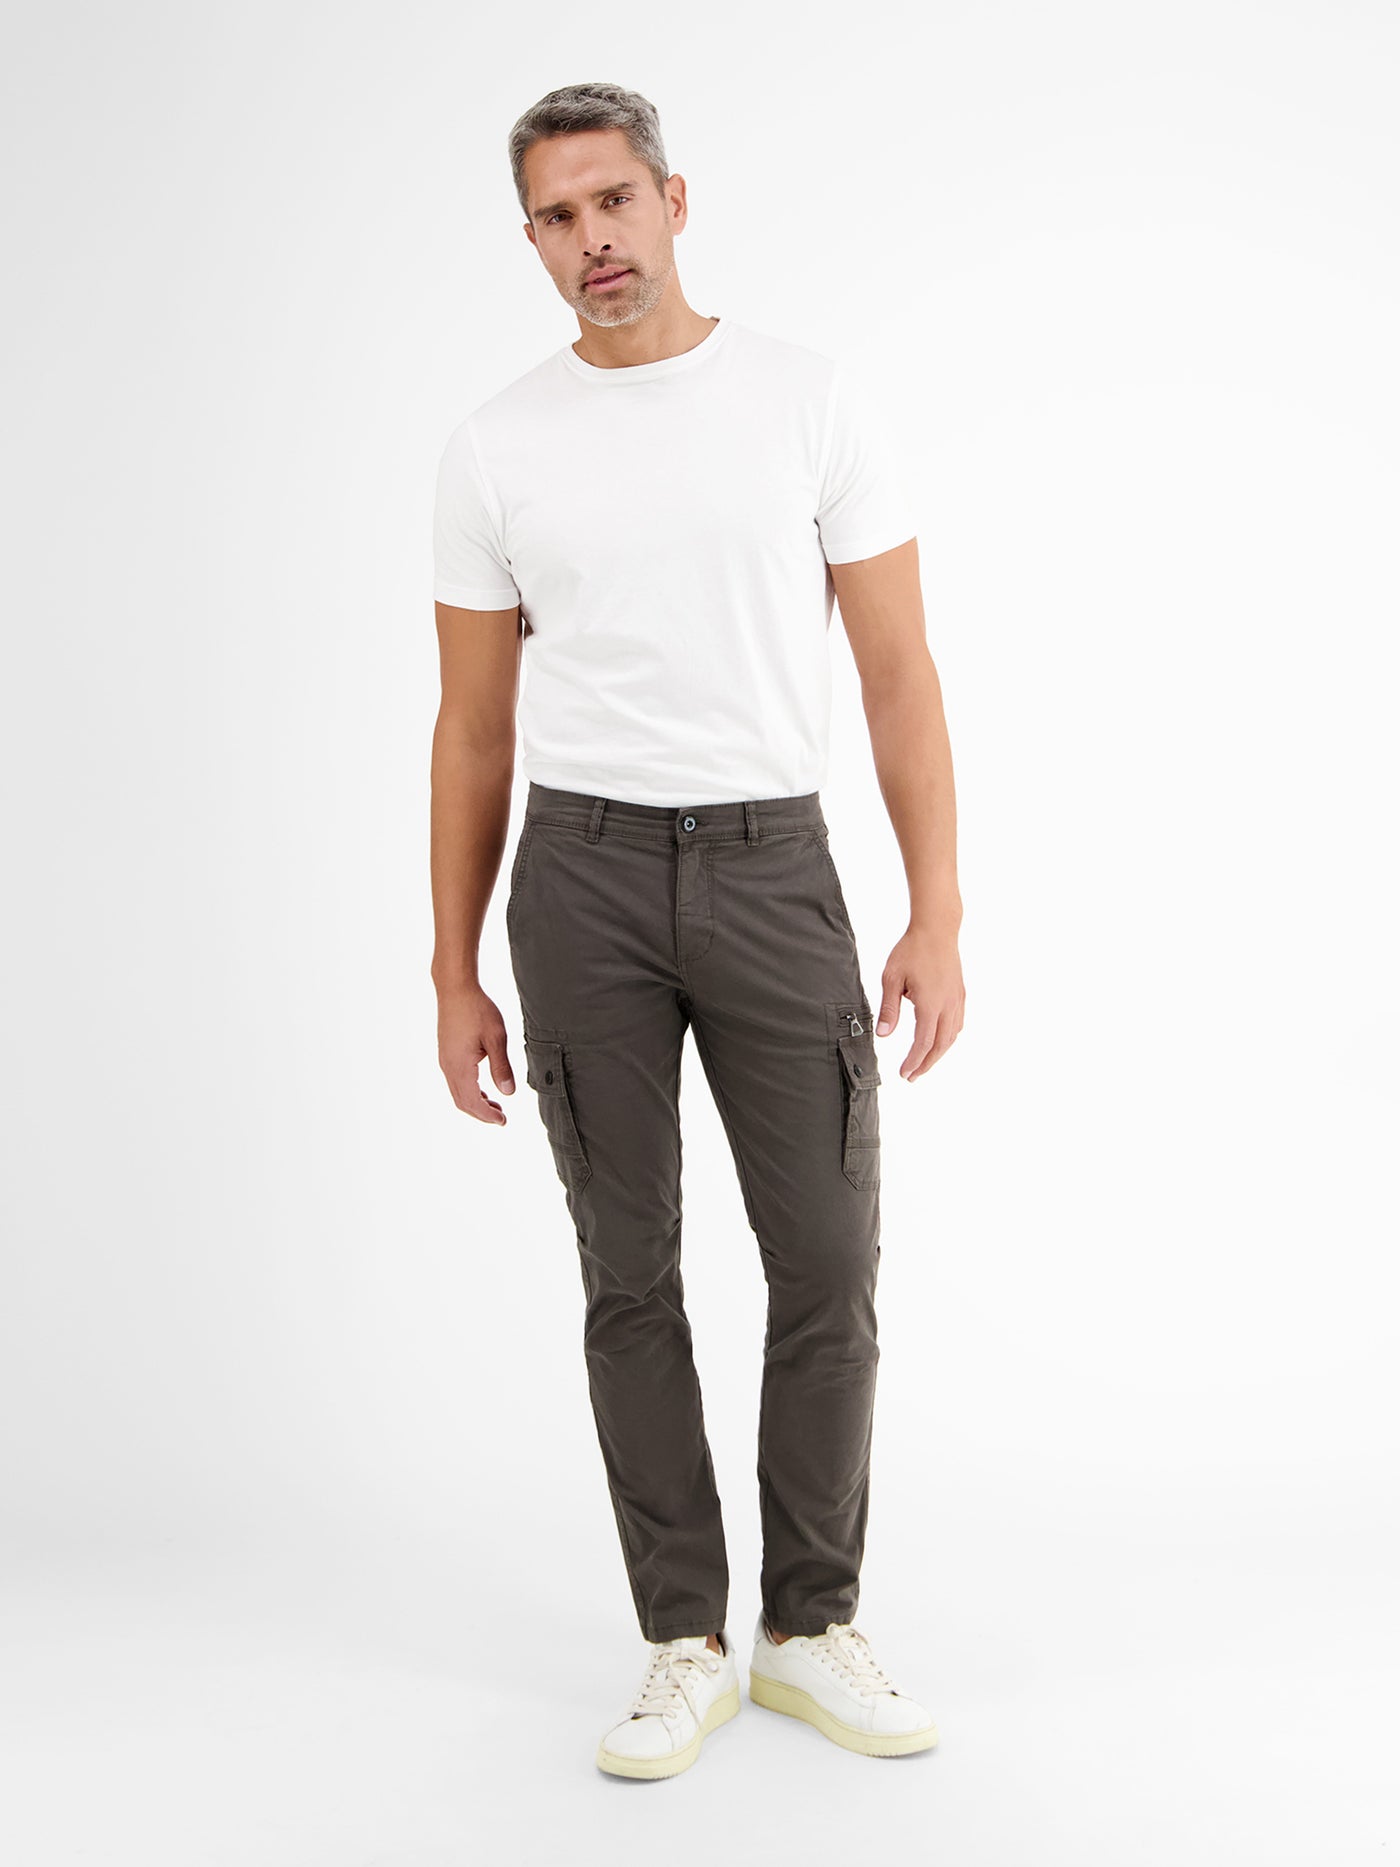 Cargo pants in a narrow, straight fit